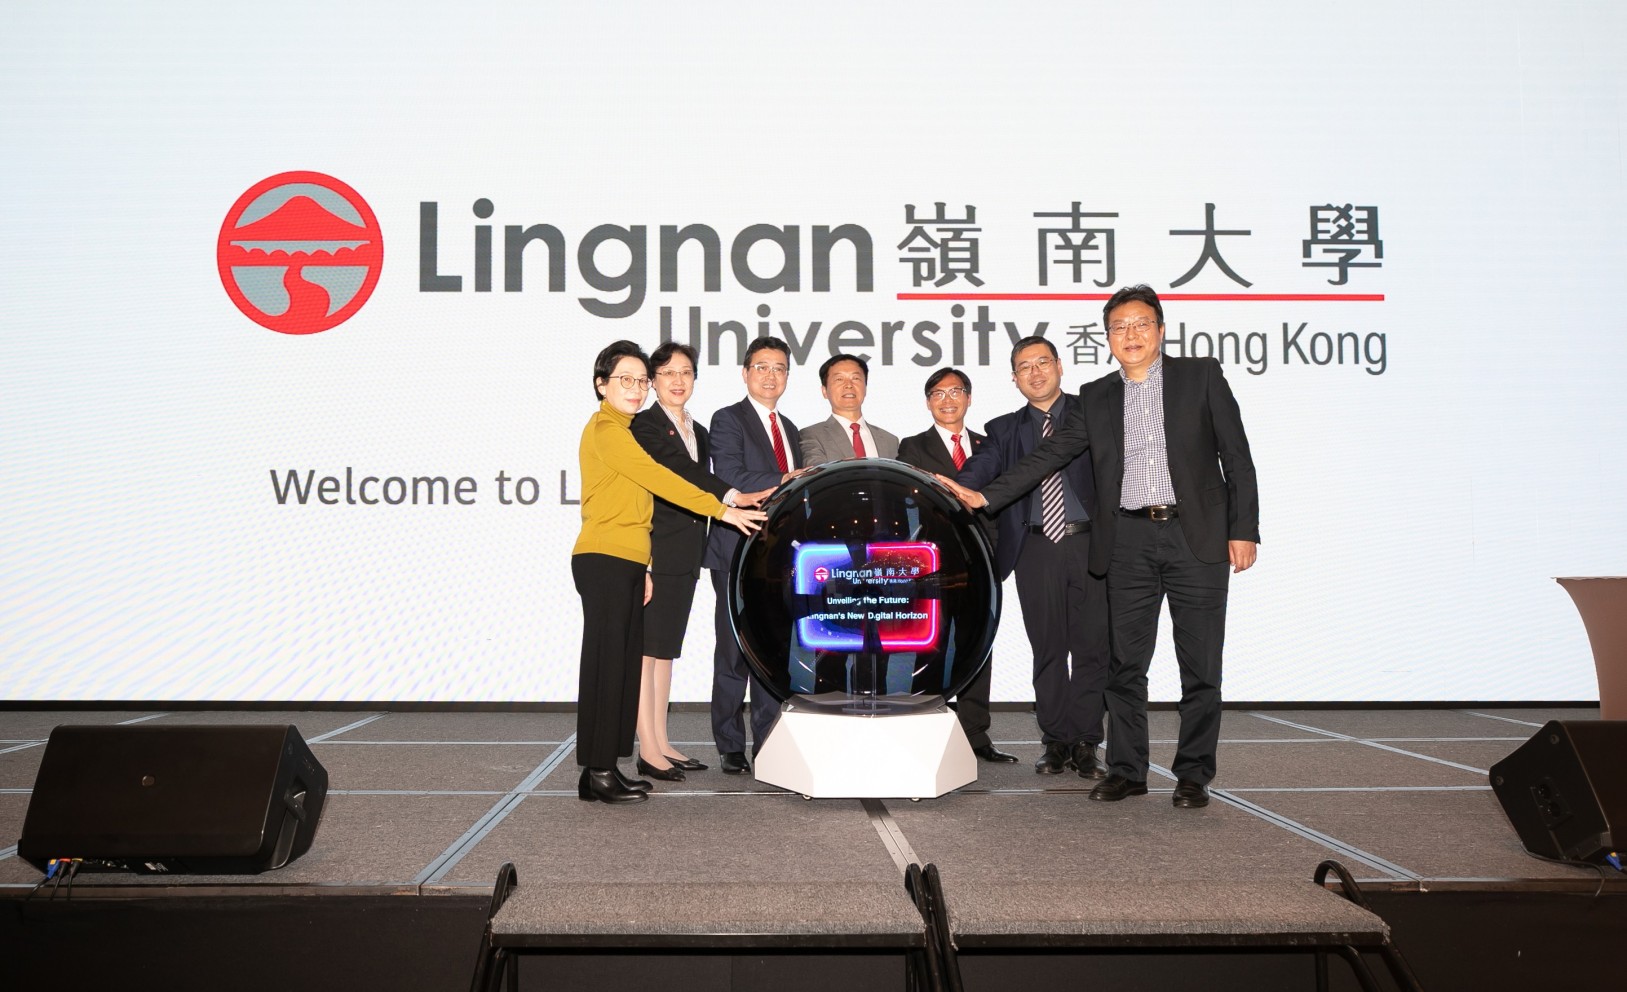 Presided over by the senior management members, the launching ceremony of Lingnan University’s new website marks a significant milestone in our digital innovation and progress.